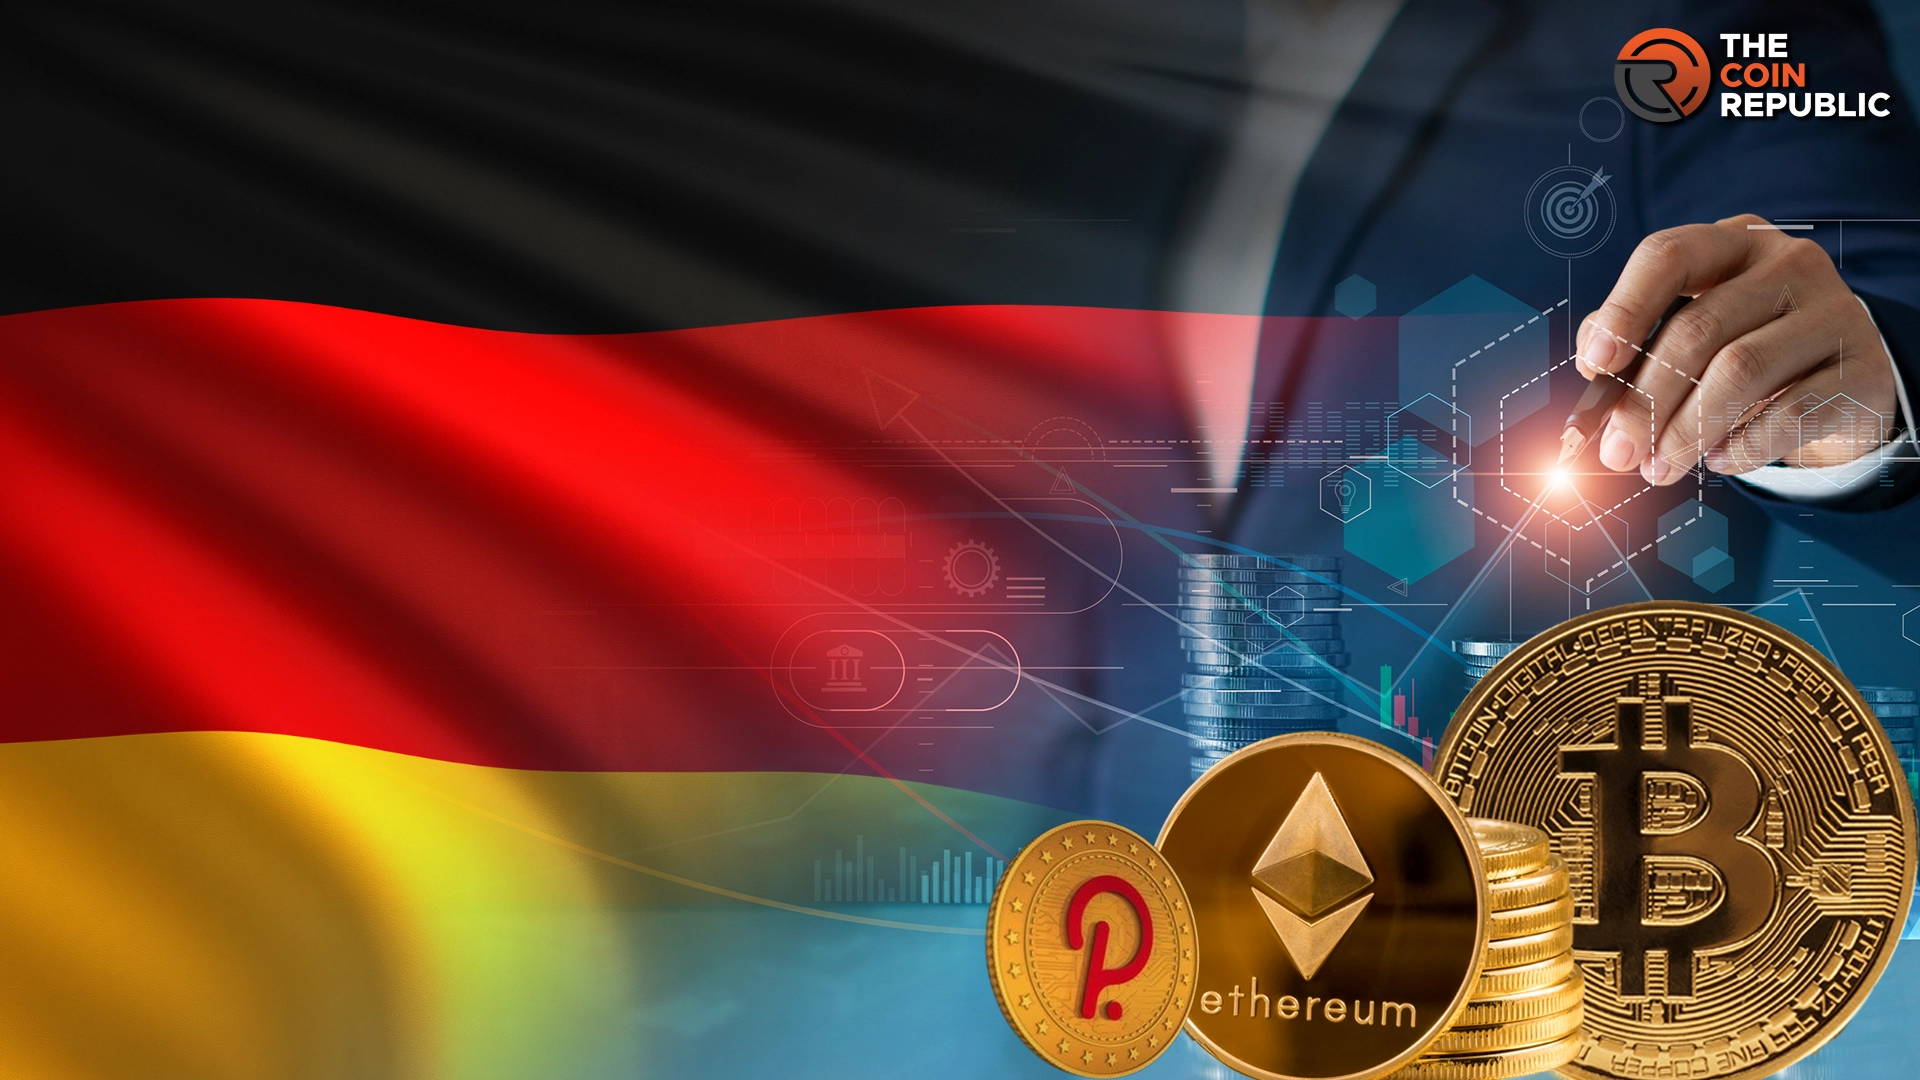 German Investors Stake Large Amounts of Crypto Before BTC Halving